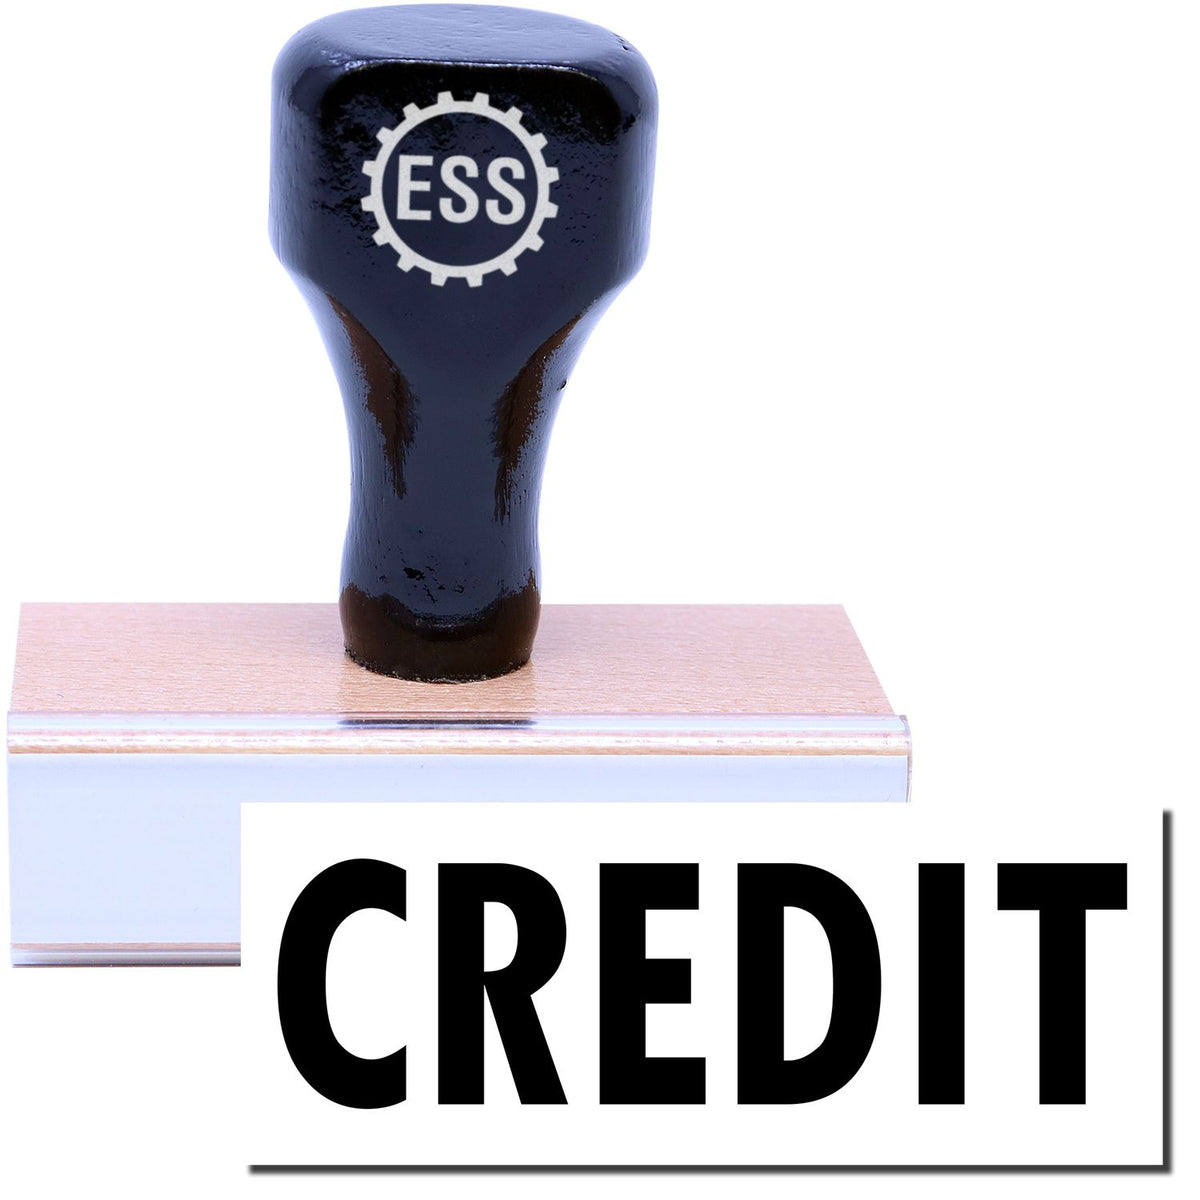 A stock office rubber stamp with a stamped image showing how the text &quot;CREDIT&quot; is displayed after stamping.